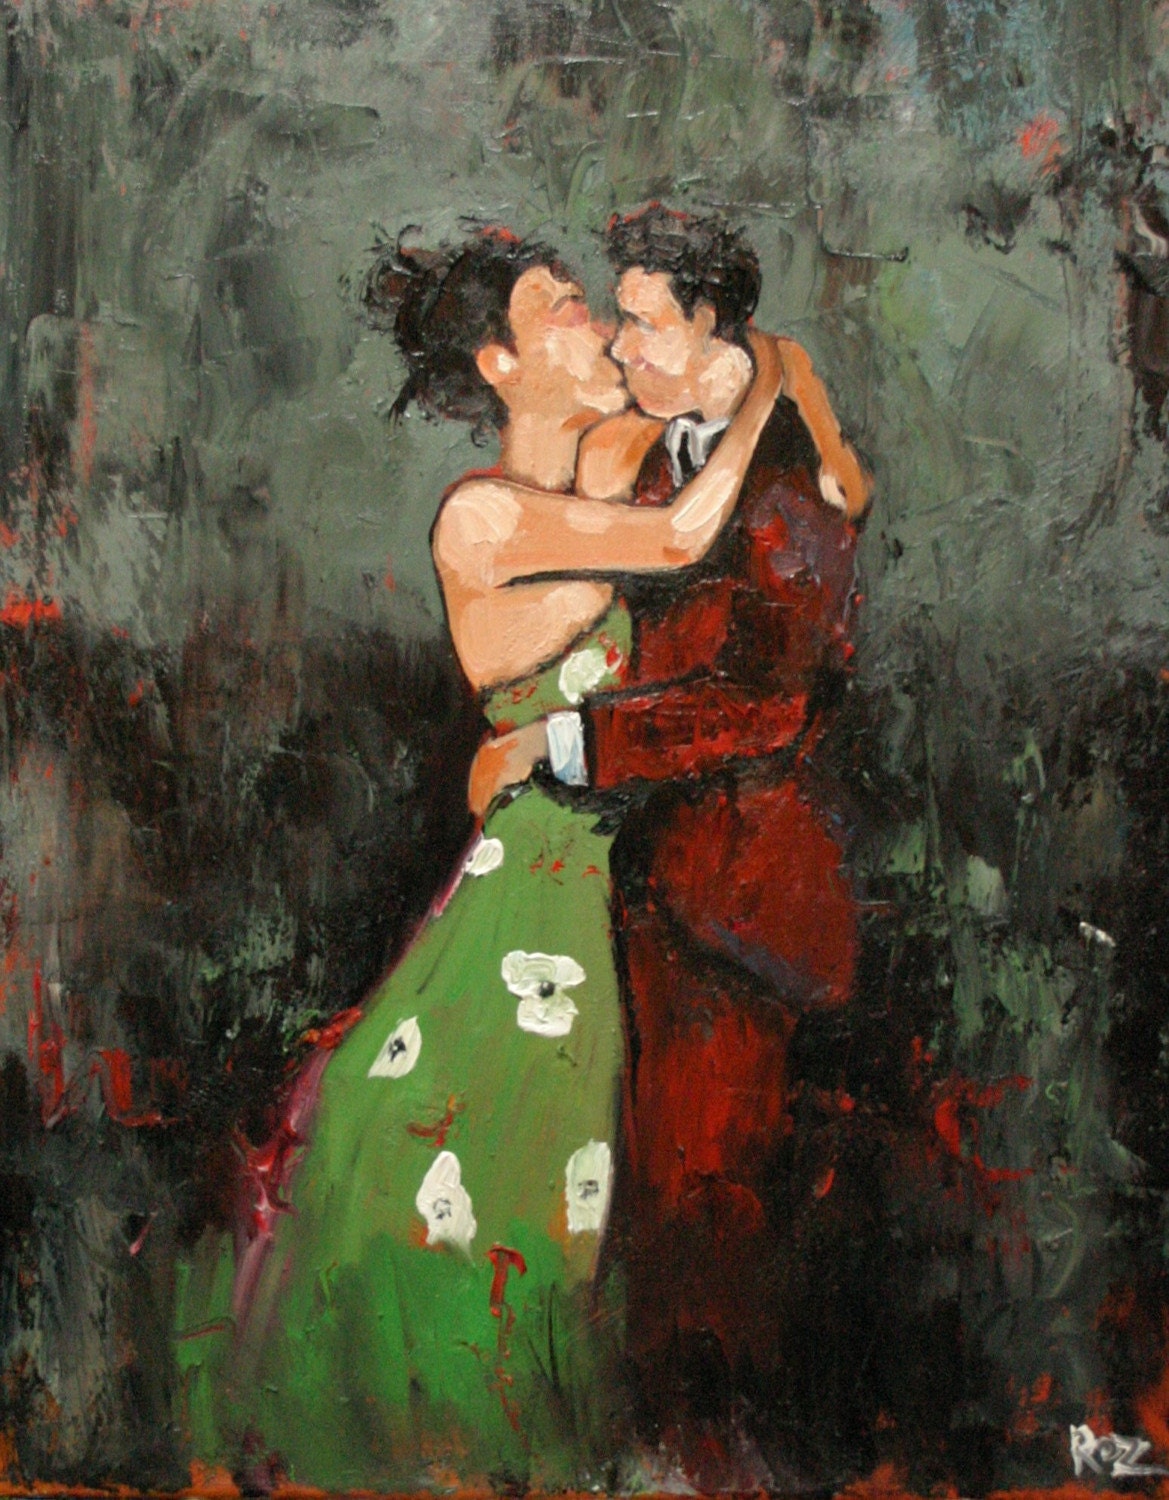 Commission your own Kiss painting by Roz